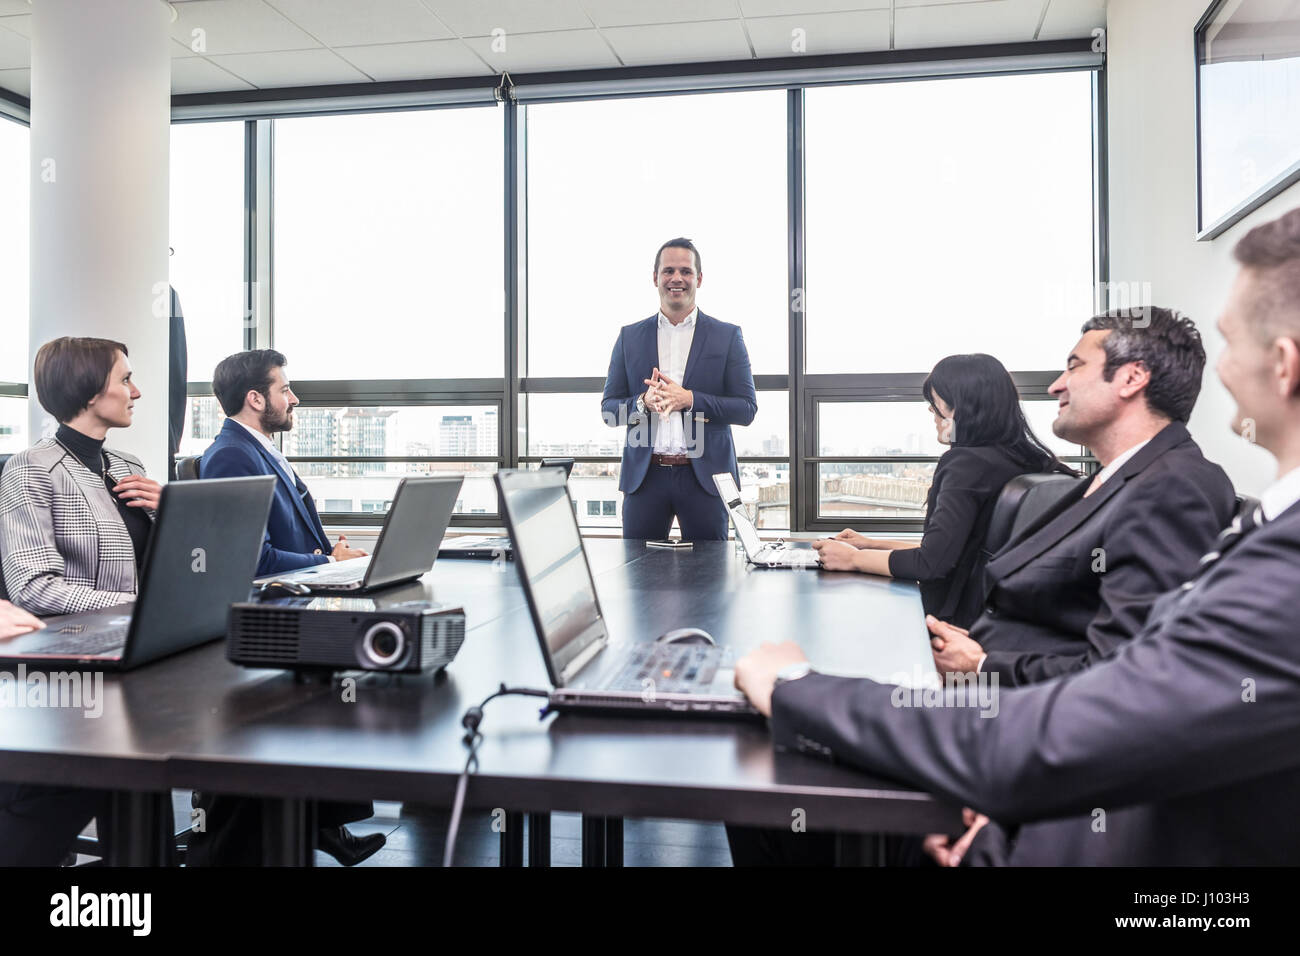 Corporate business team office meeting Stock Photo - Alamy